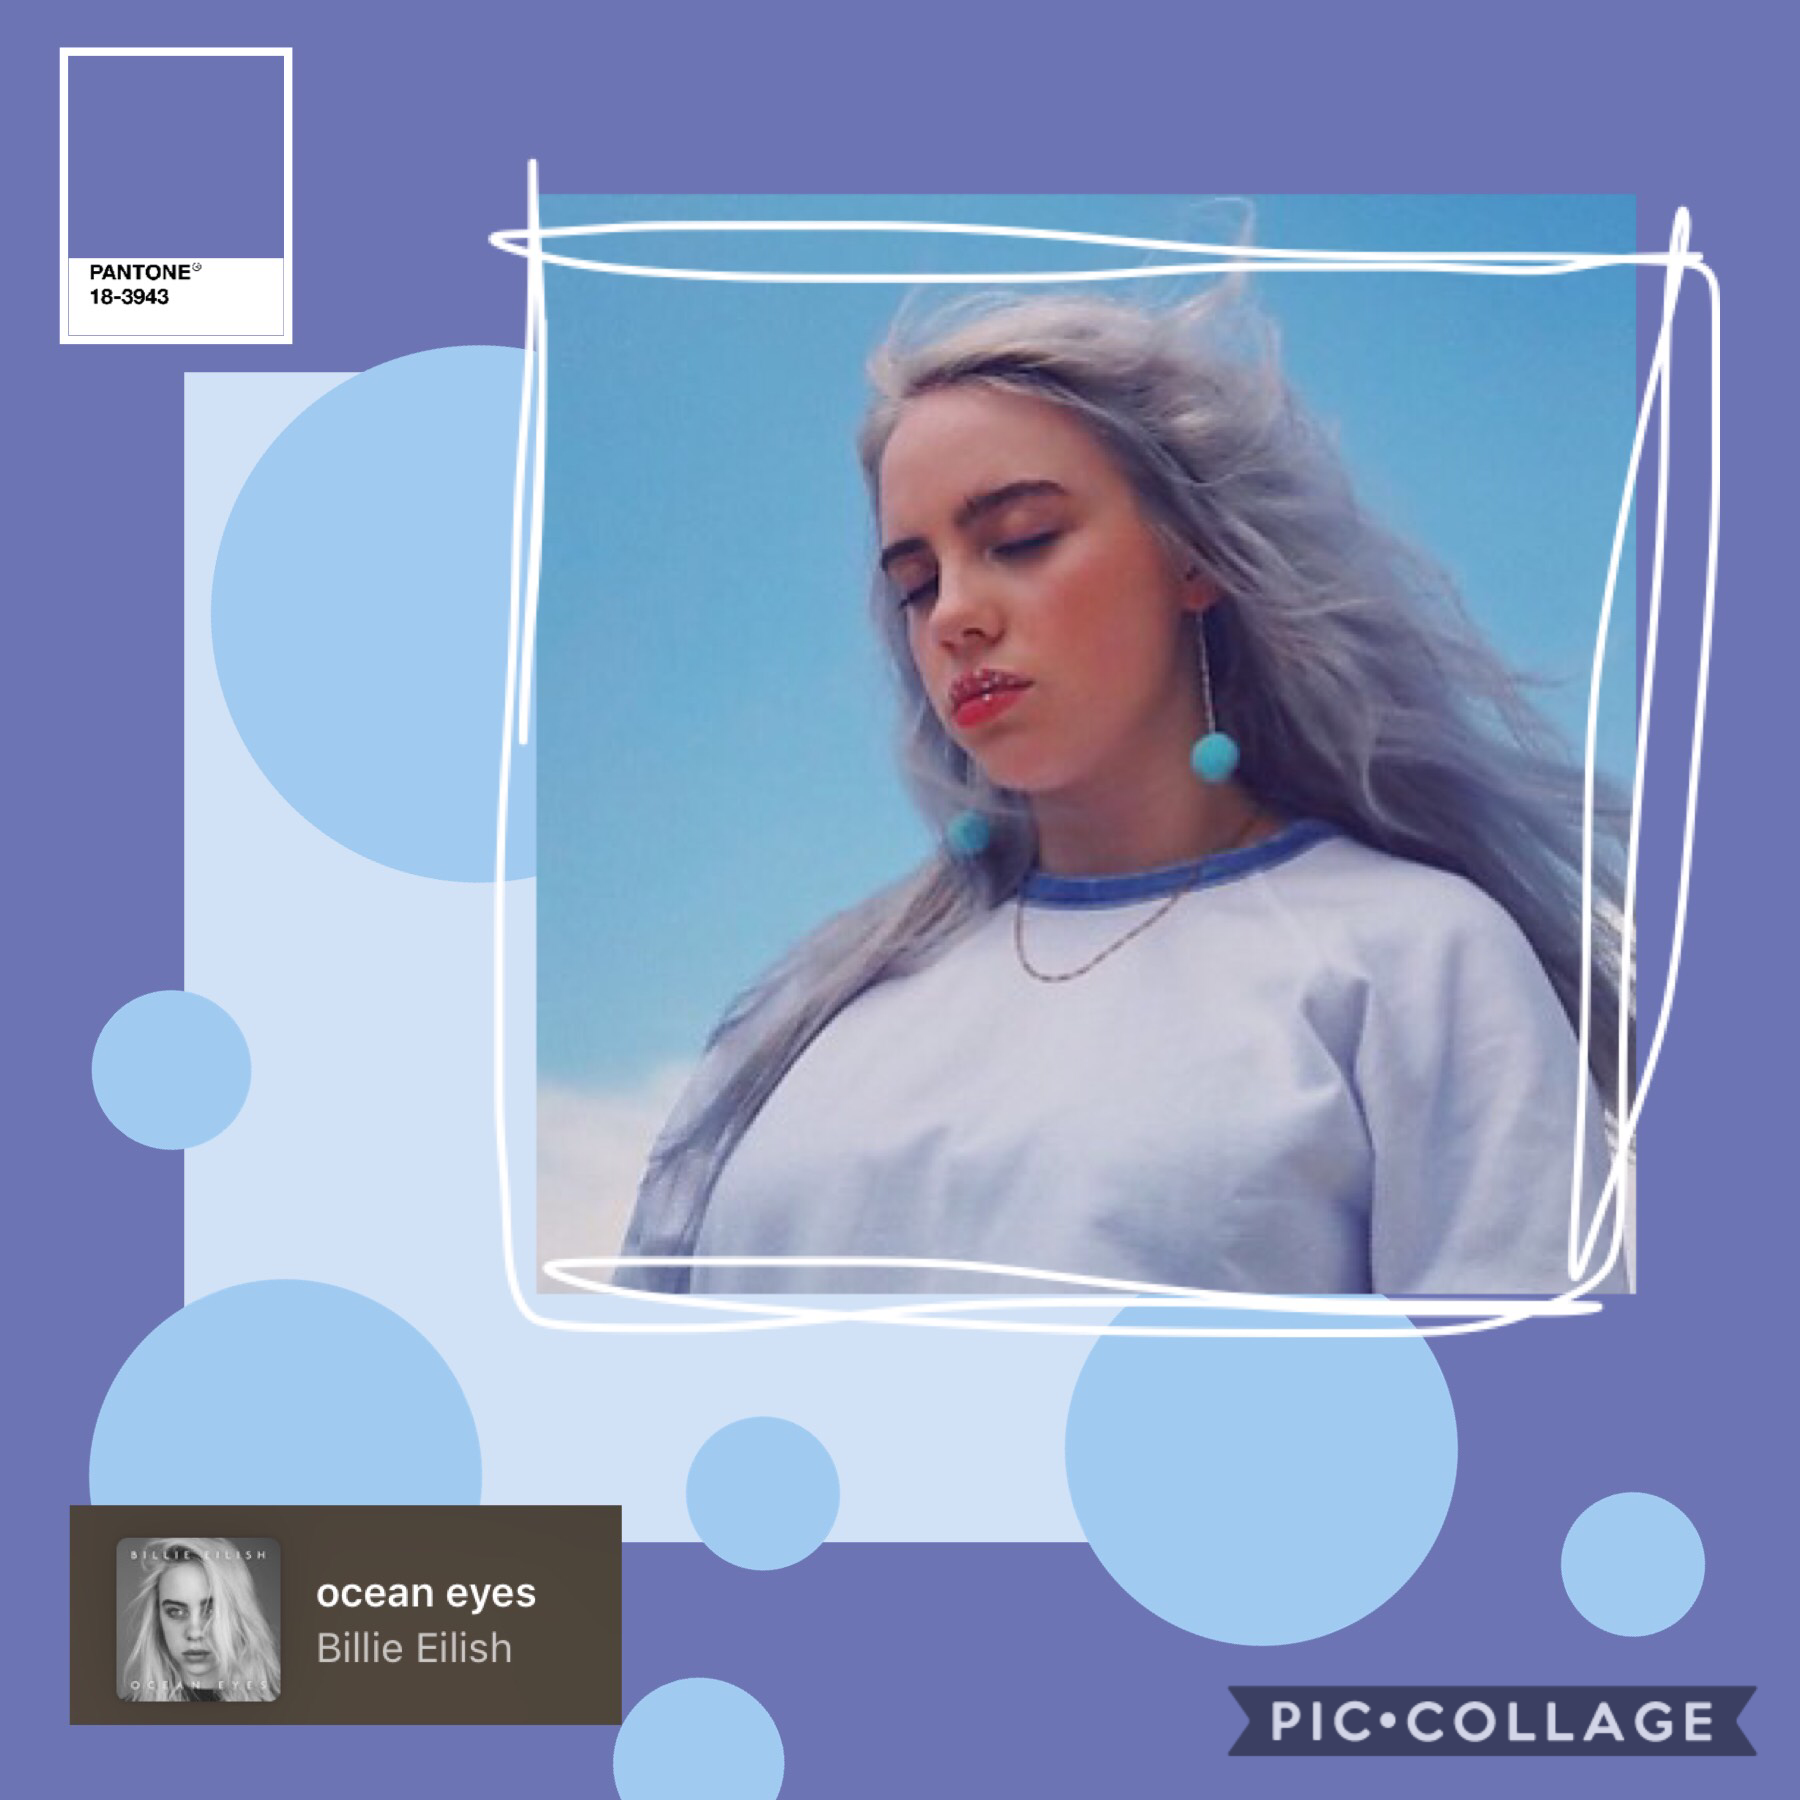 BEEN OBSESSED WITH BILLIE EILISH RECENTLY!